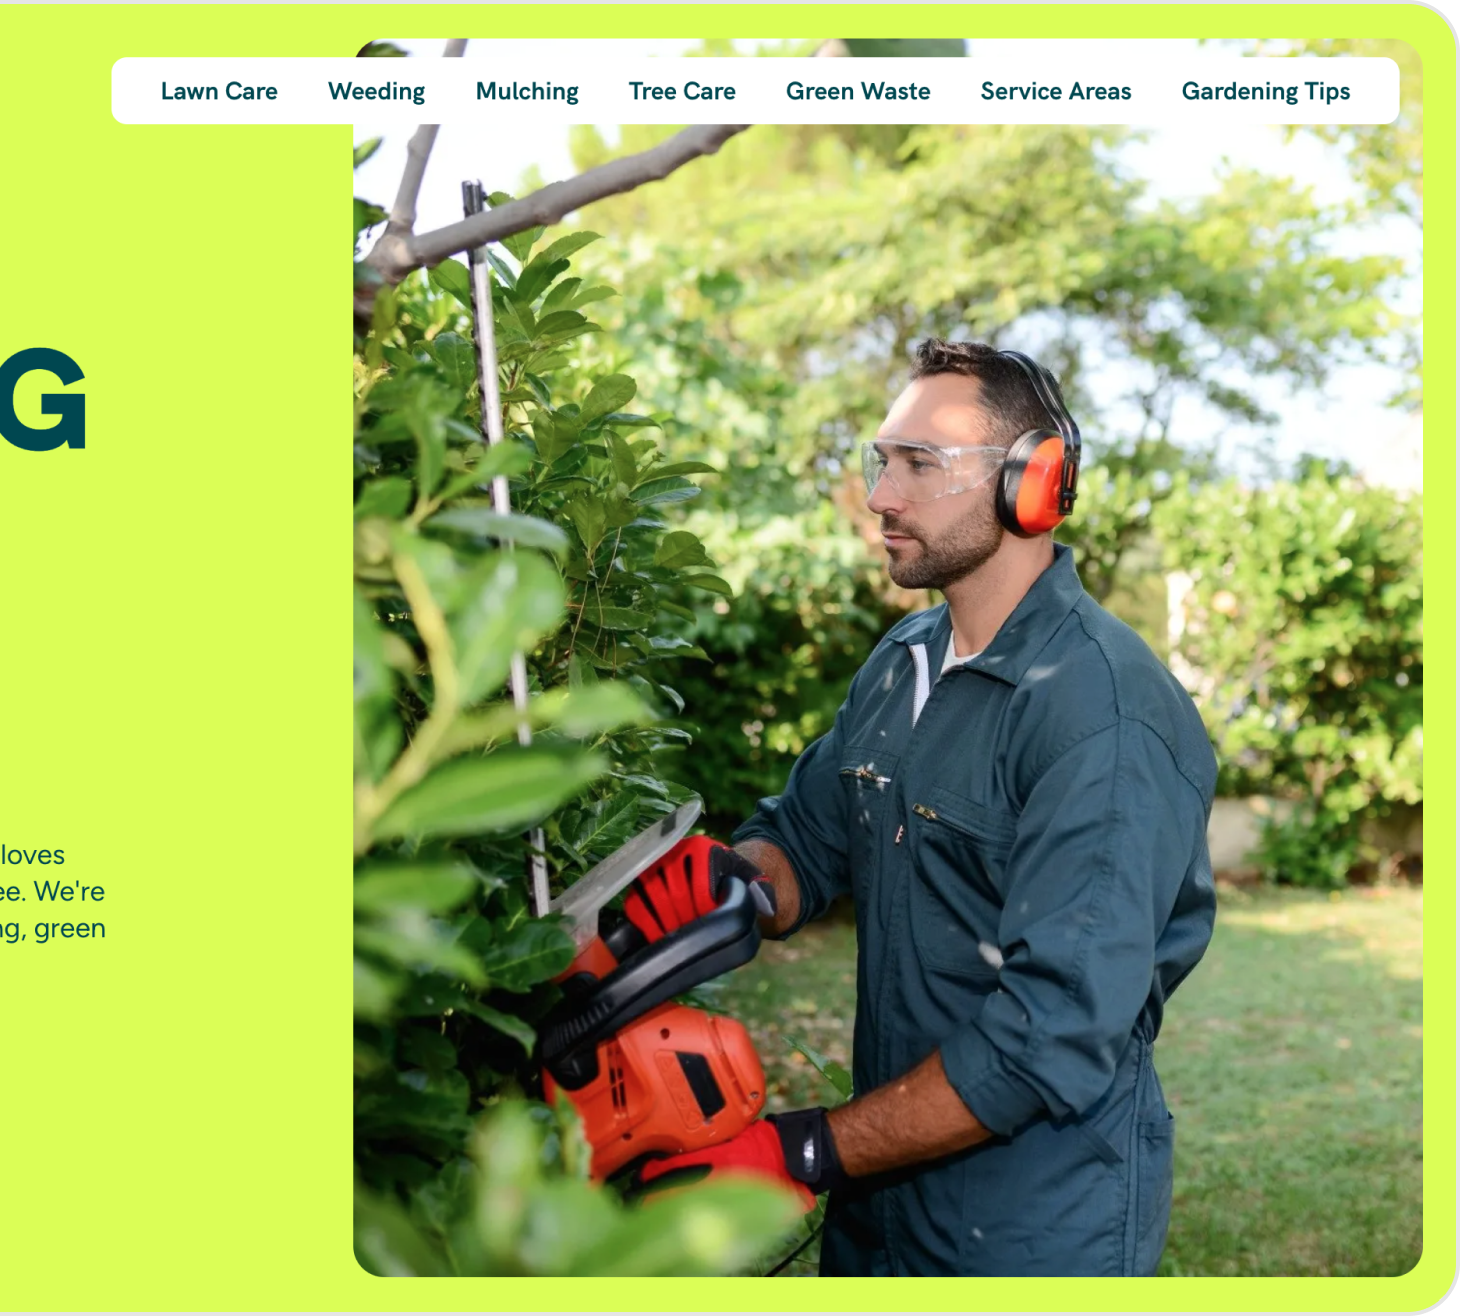 A man wearing headphones is cutting a tree with a chainsaw